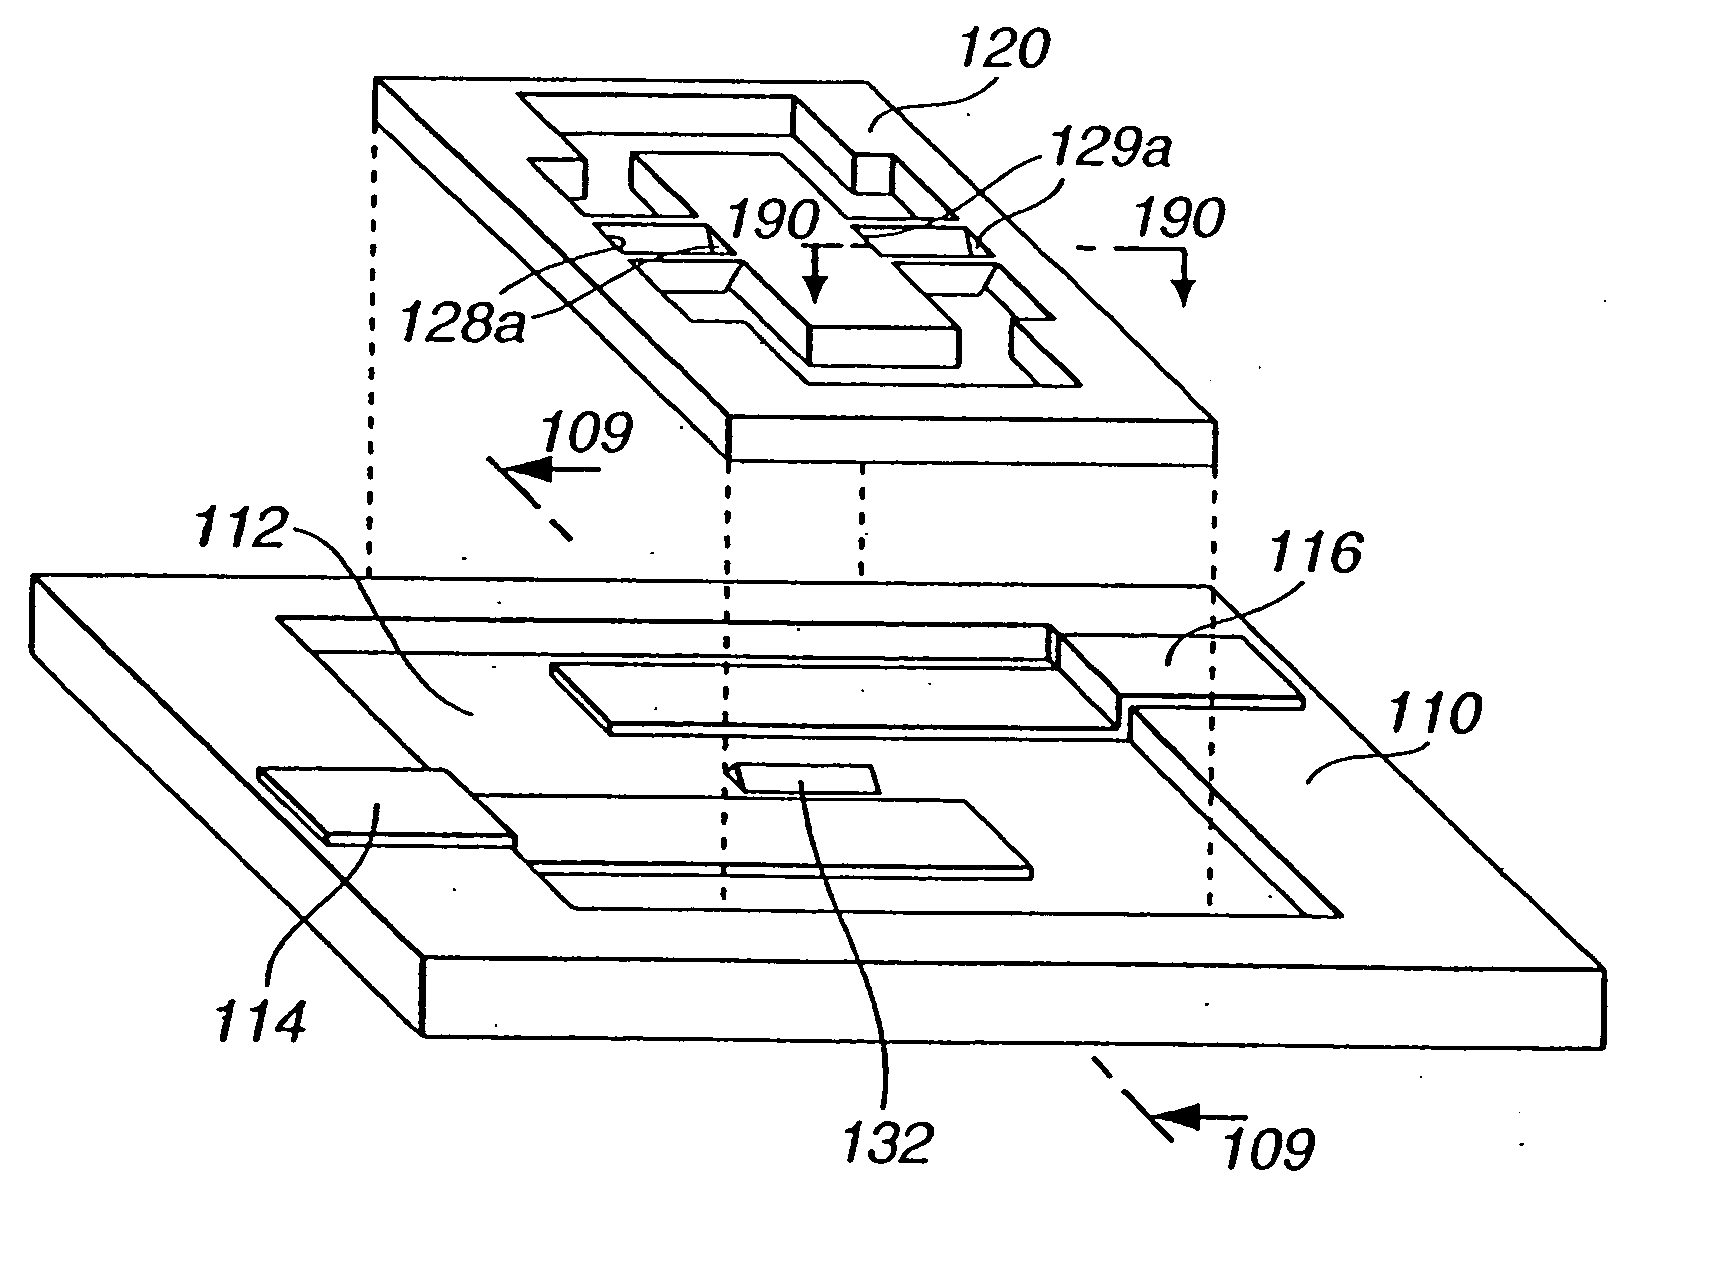 Tiltable-body apparatus, and method of fabricating the same